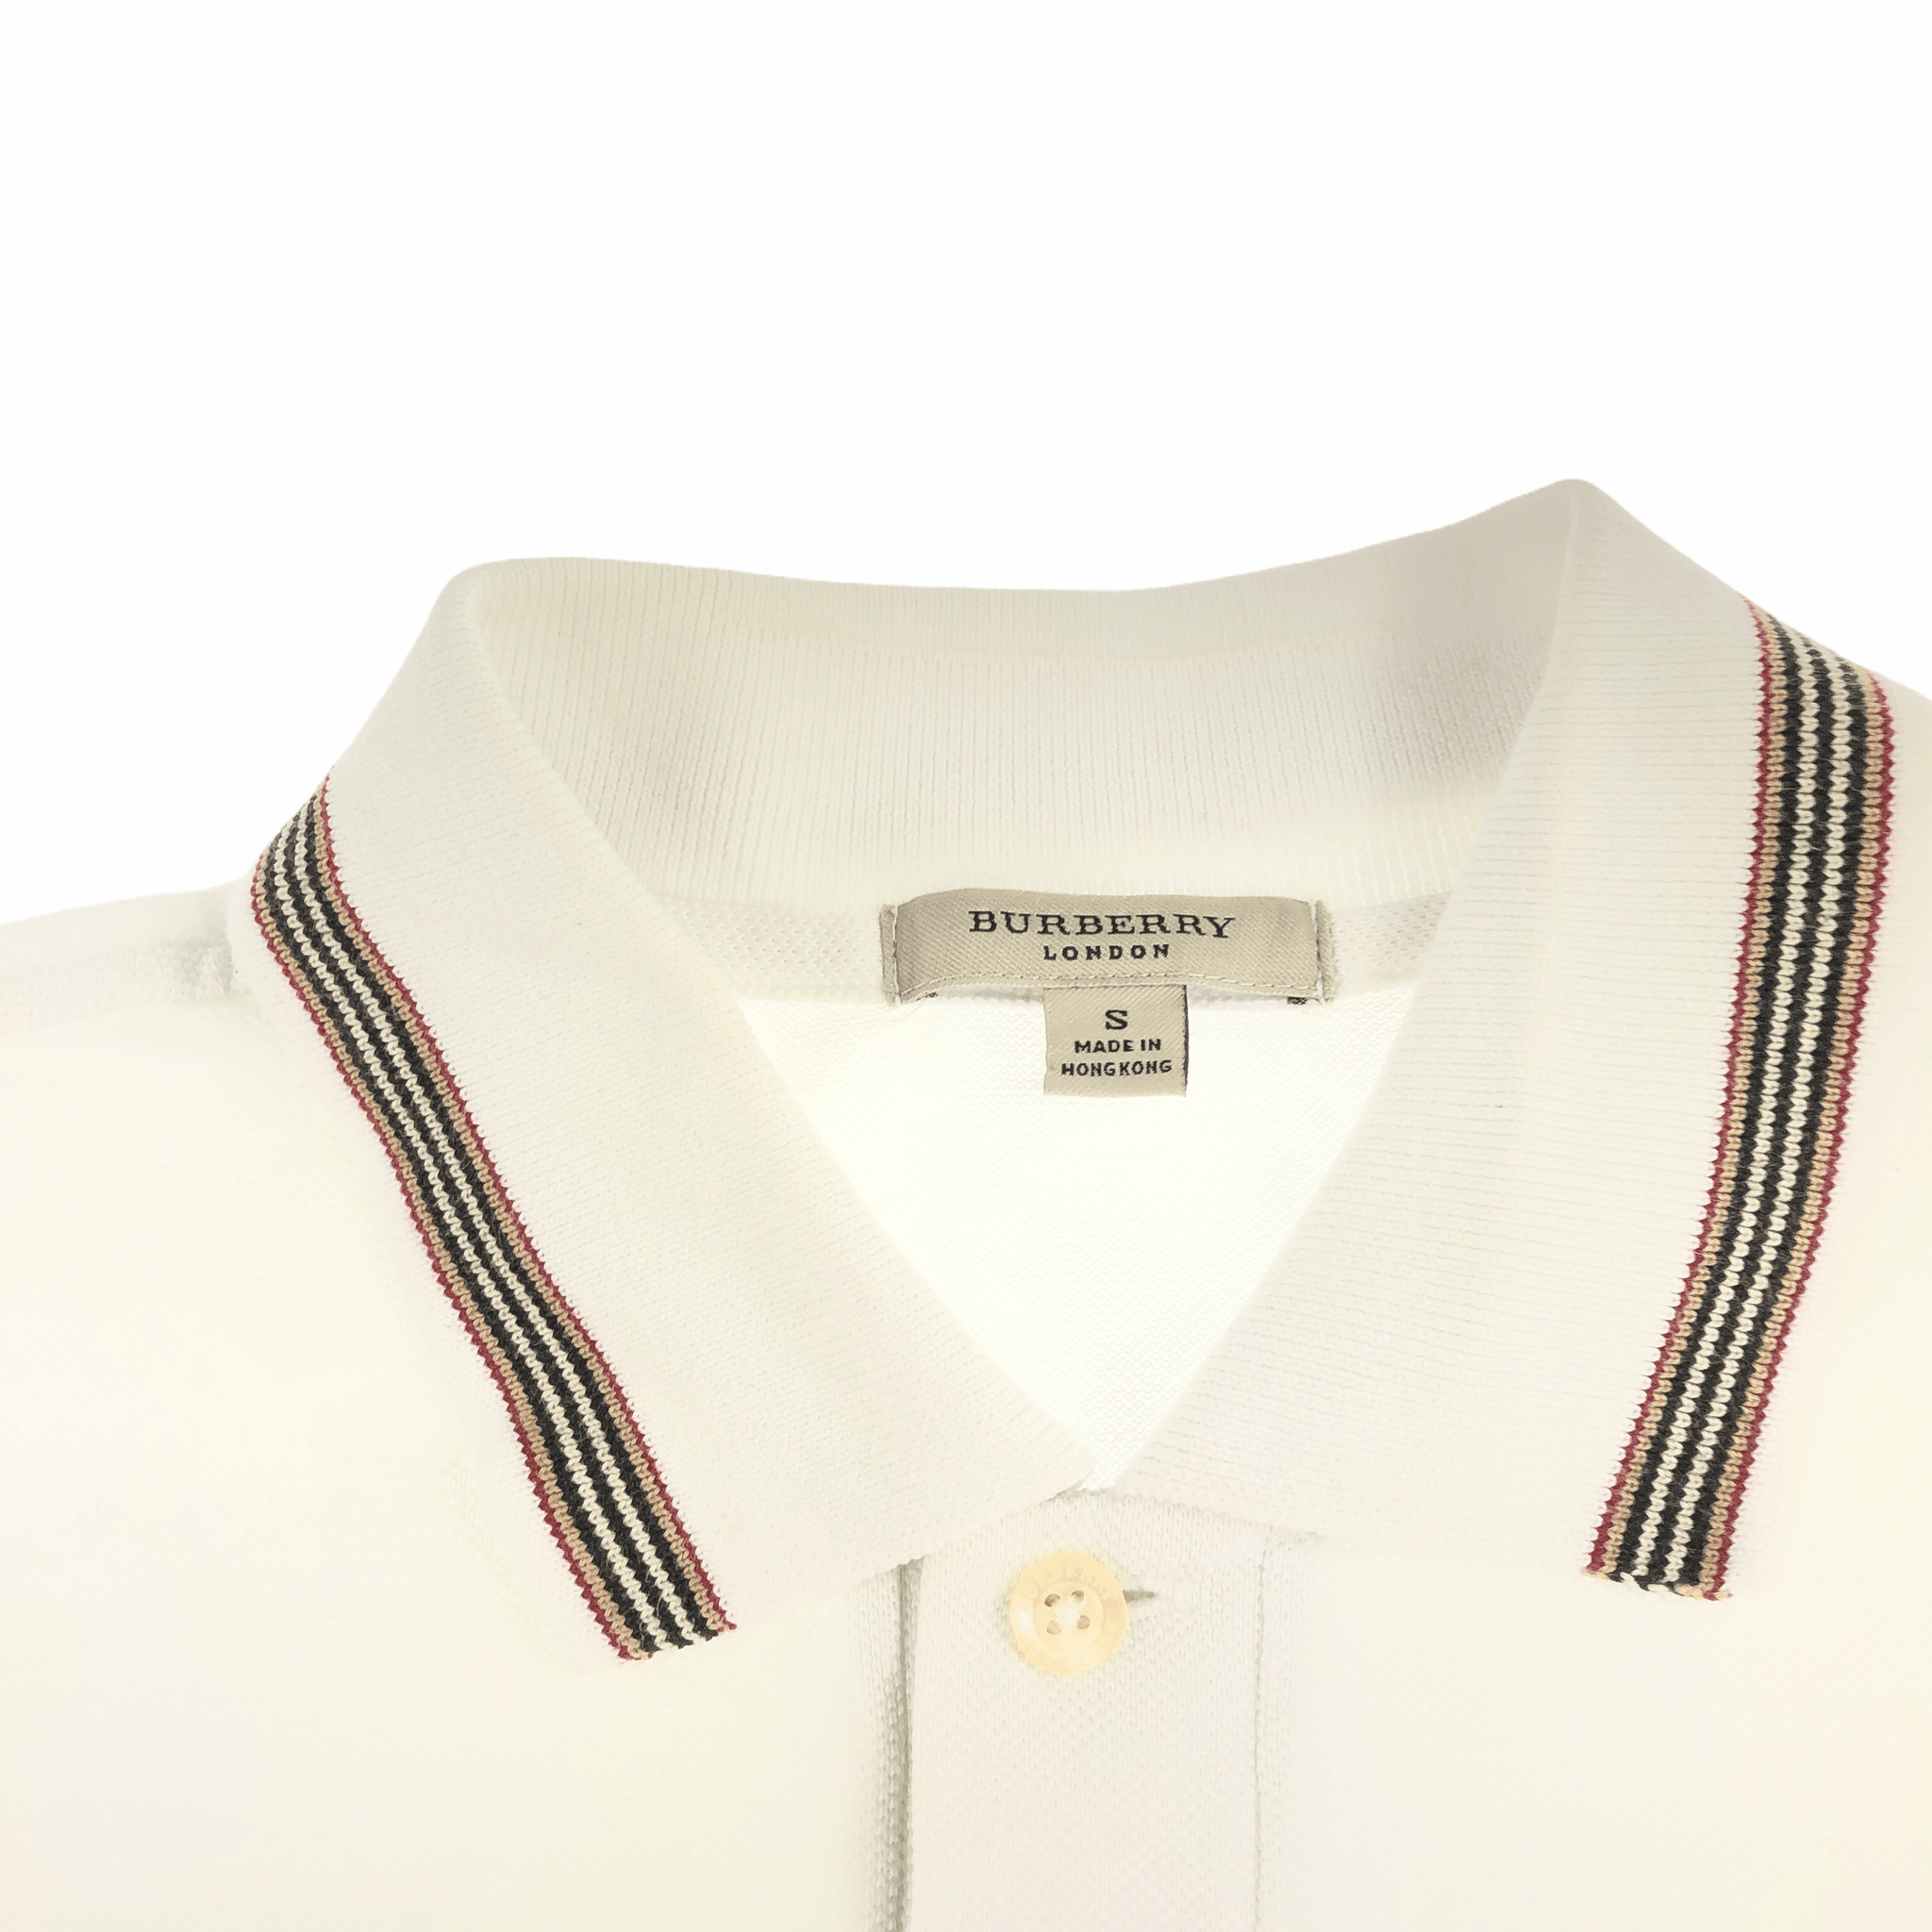 Burberry long sleeve polo shirt size S - second wave vintage store